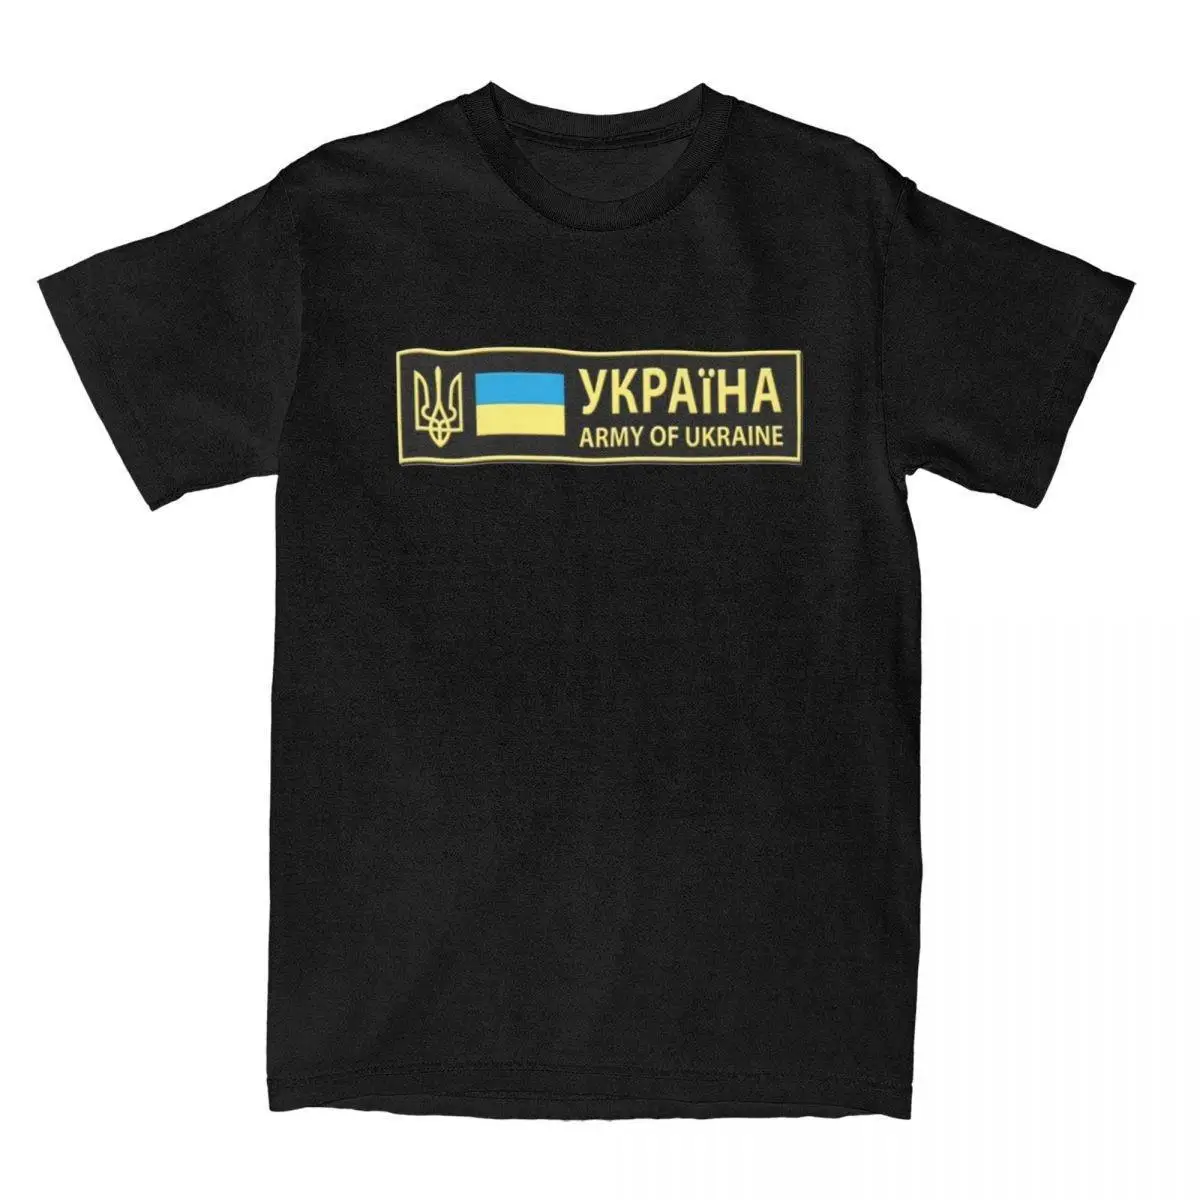 Army Of Ukraine Flag T-Shirt Men Fashion 100% Cotton Tees Round Neck Short Sleeve T Shirt Graphic Printed Clothes